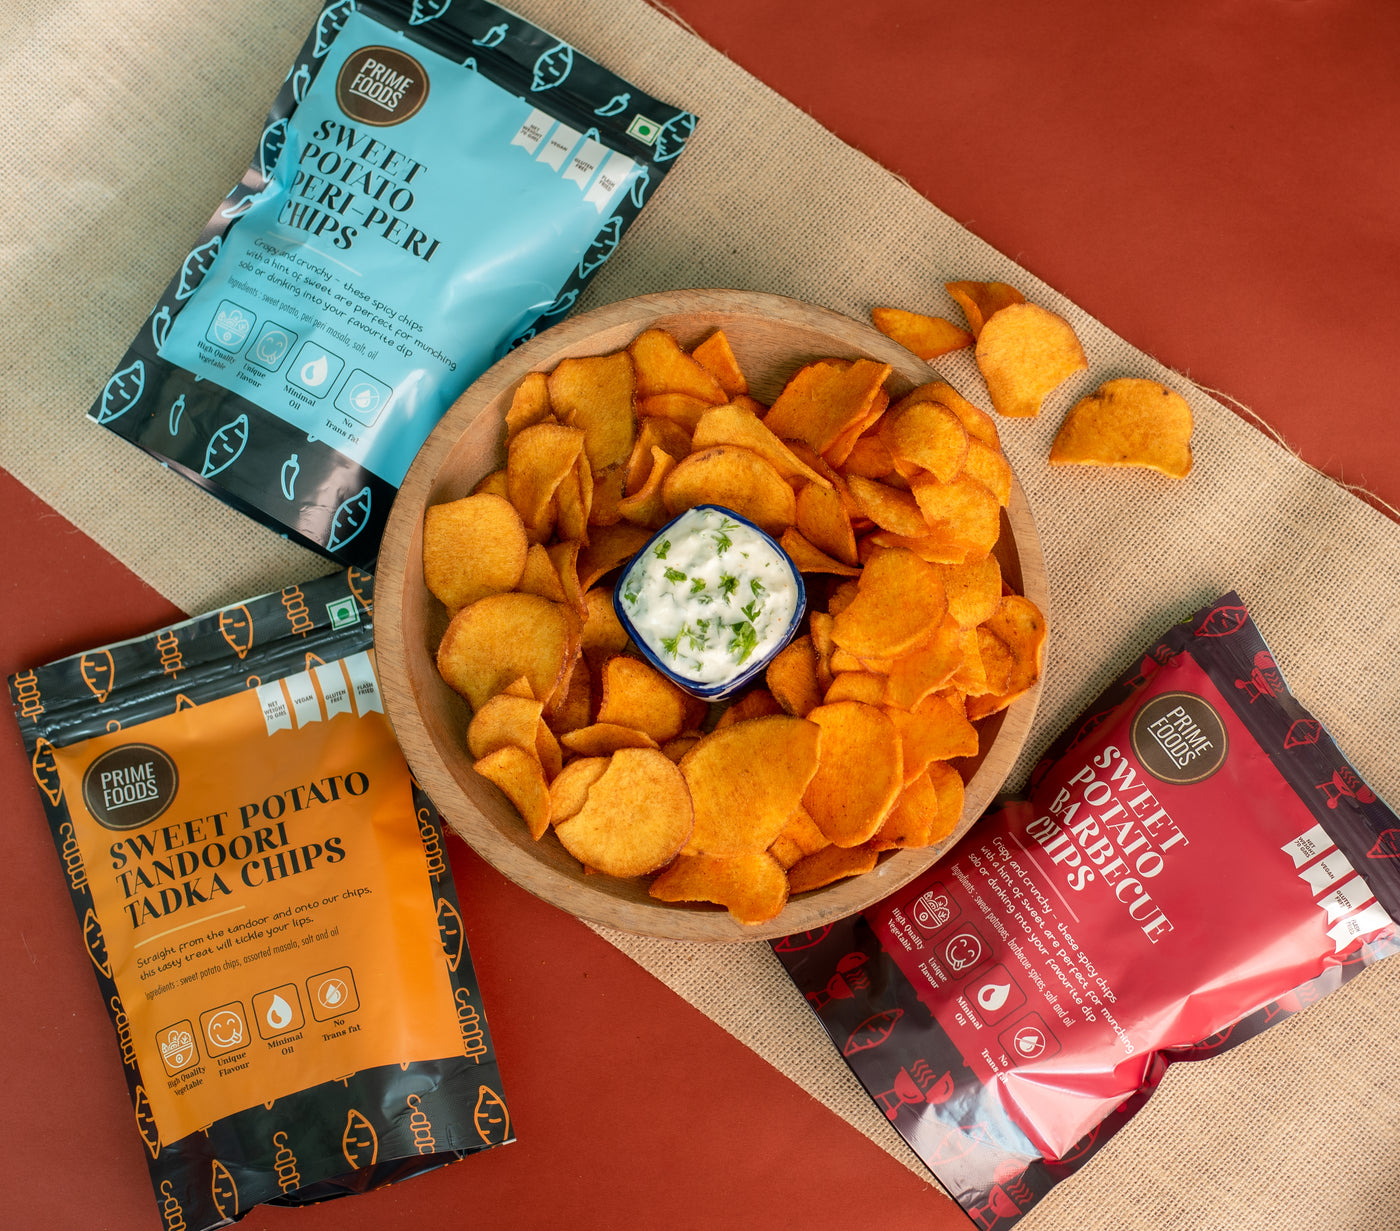 "TRY IT ALL" SWEET POTATO CHIPS PACK